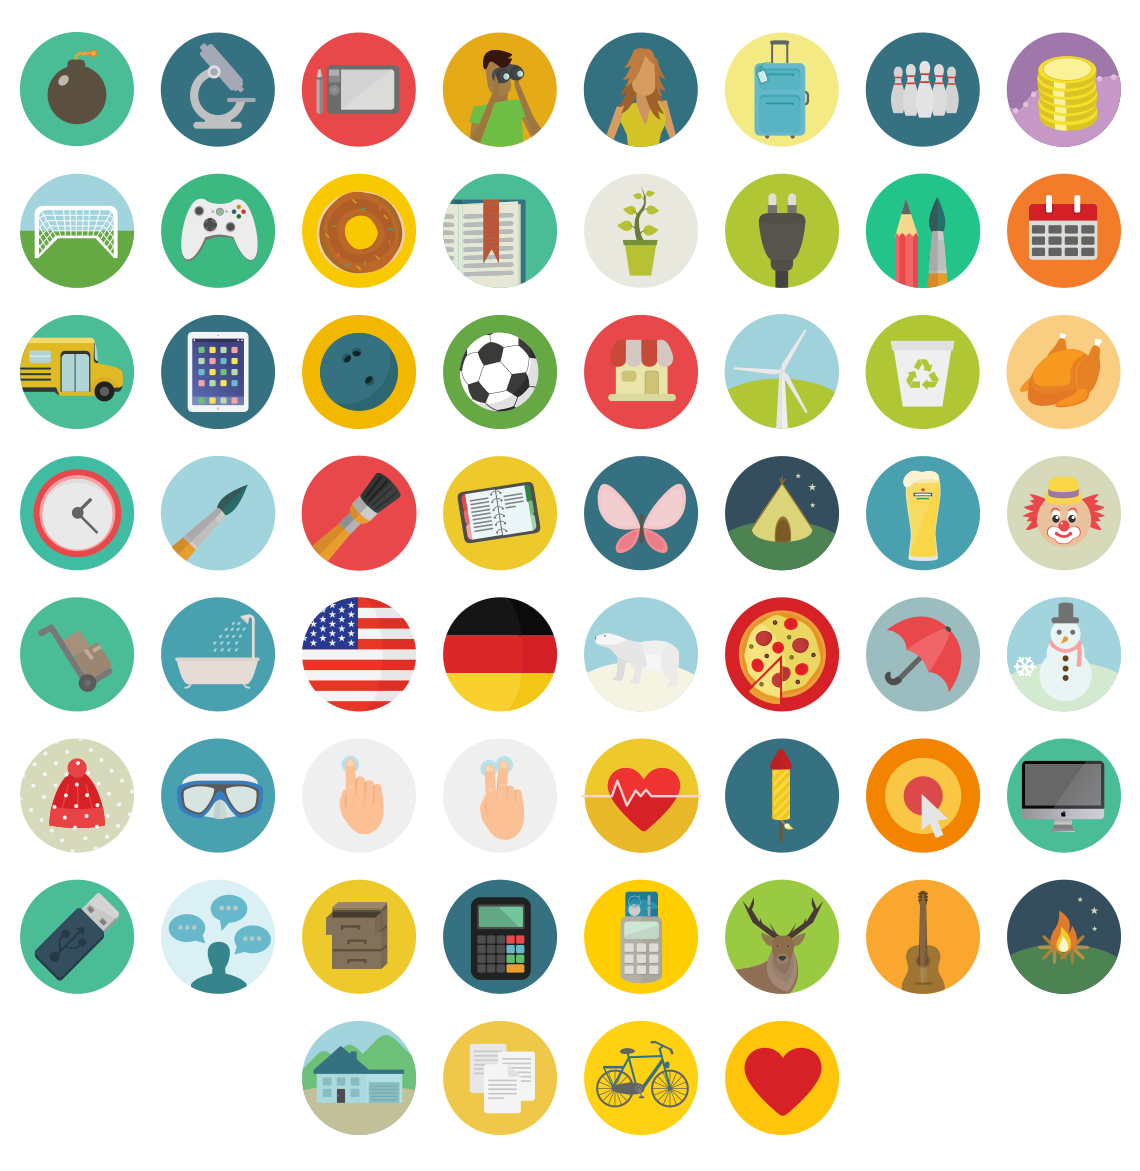 15 Information- Icon Round Images